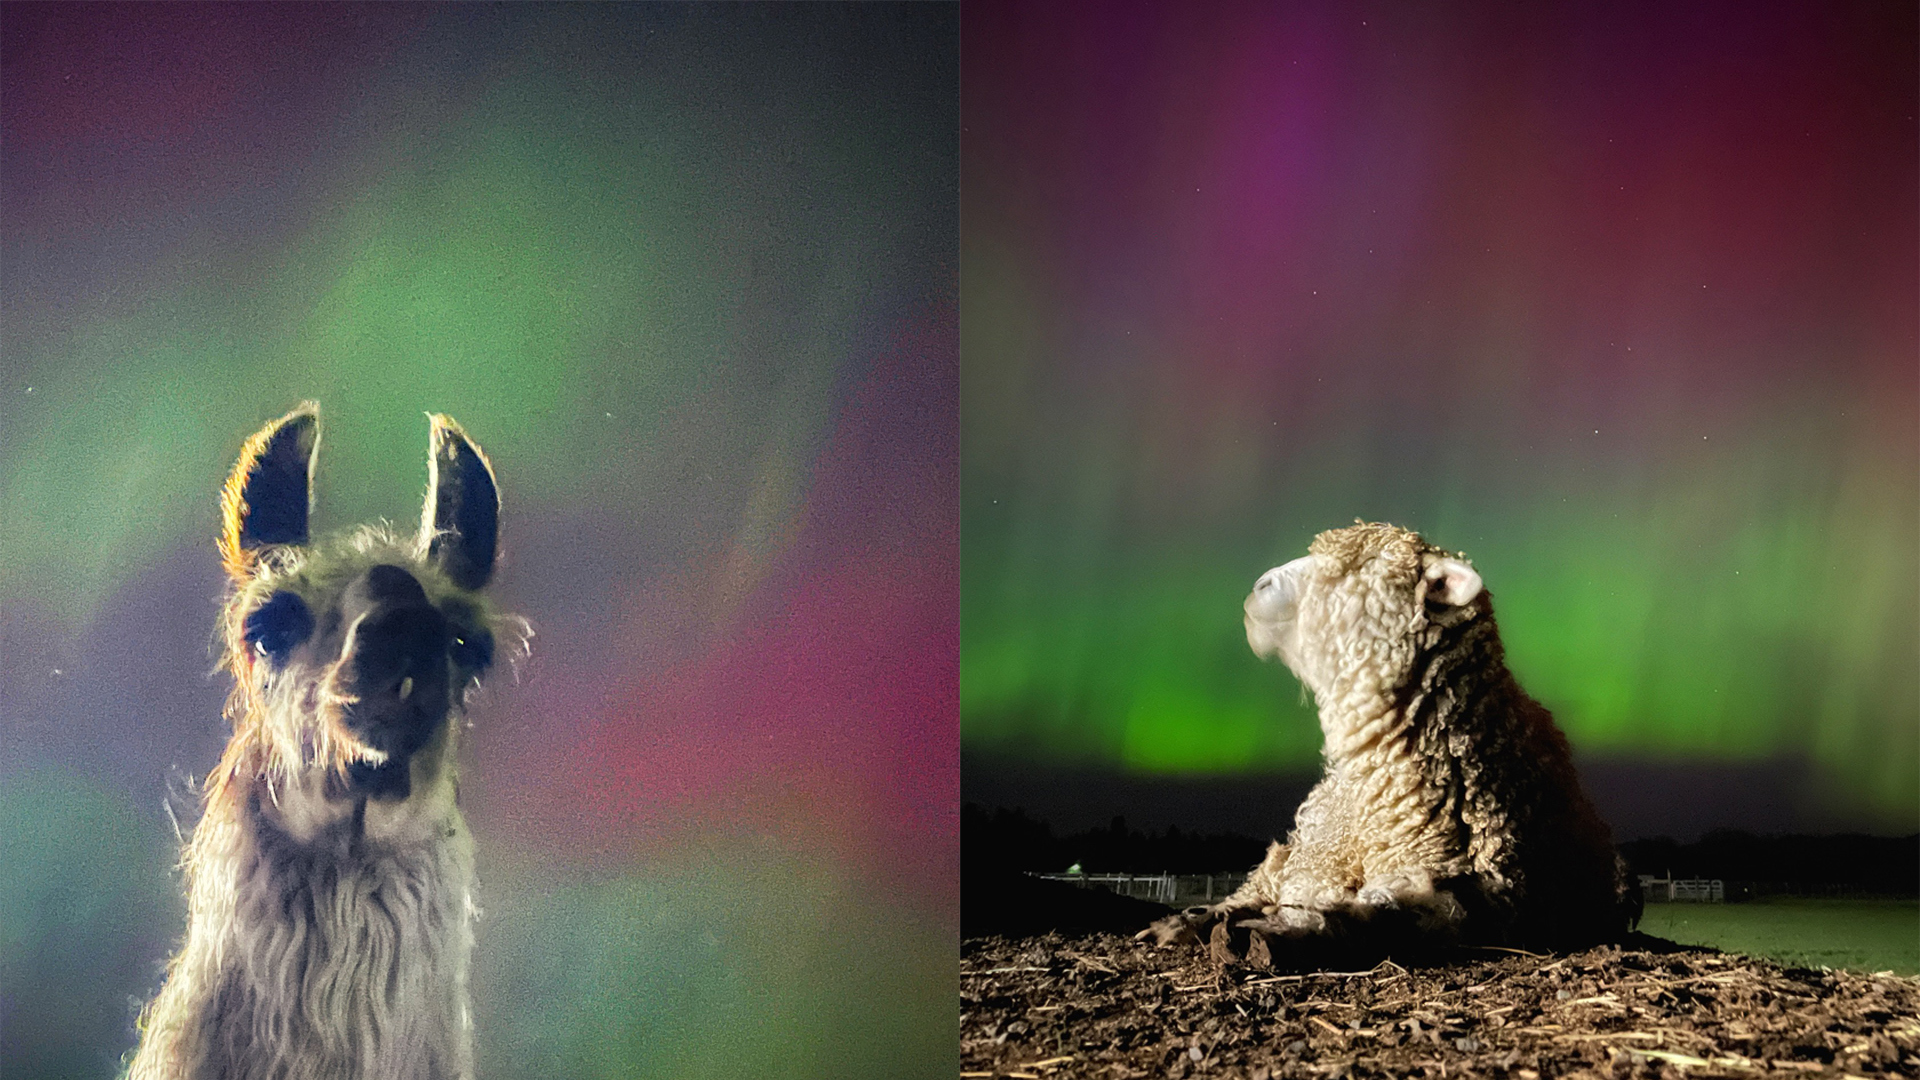 Carolynn Bernard said watching the animals was as entertaining as watching the aurora itself. Among those taking in the lights: Jim the llama and Stewie the sheep.